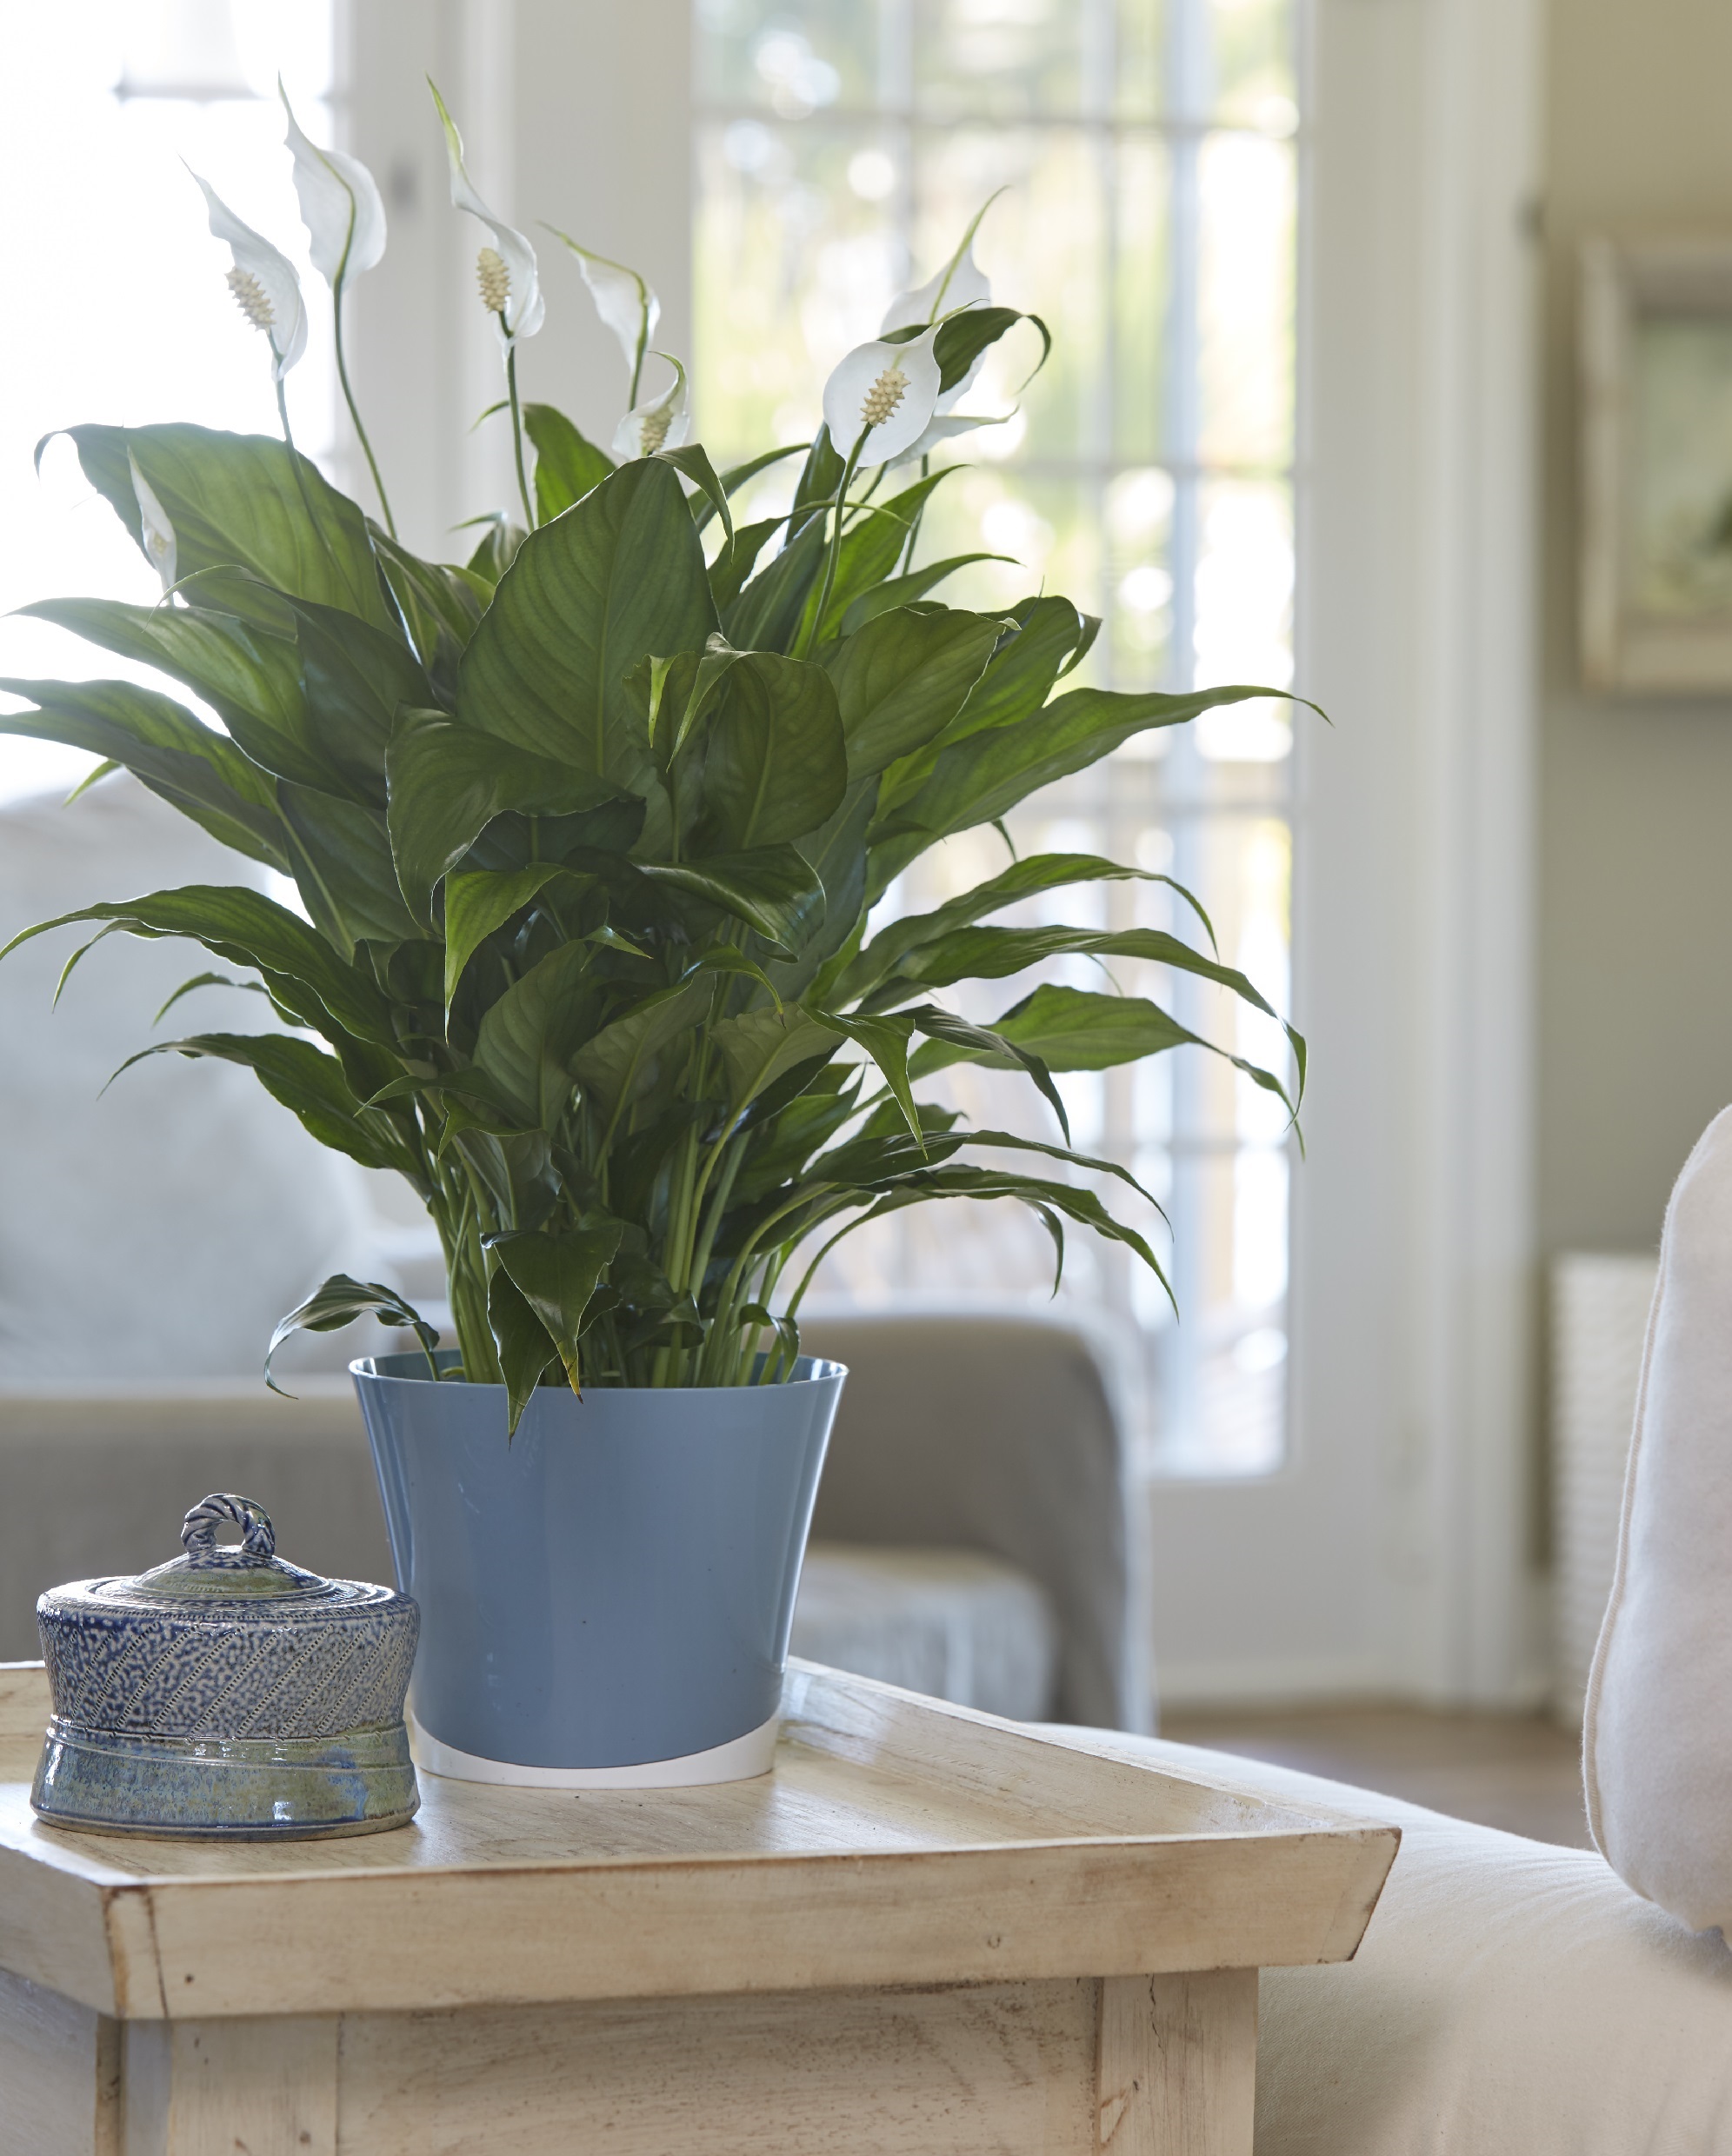 To bring attention to the new research and many health benefits of indoor plants, Costa Farms celebrates National Indoor Plant Week the third week of September.